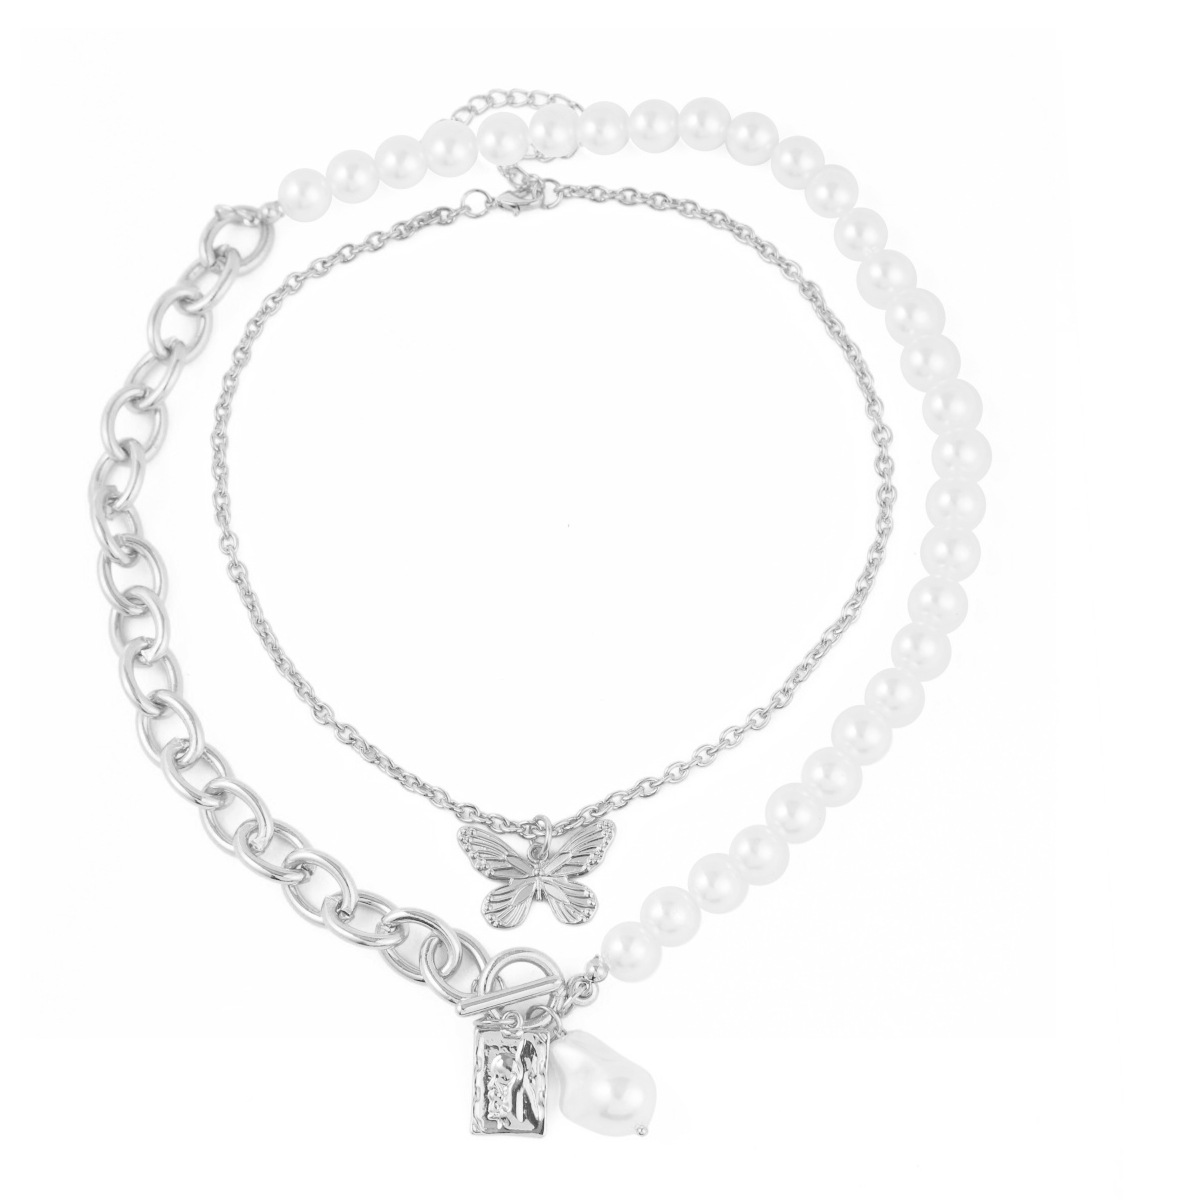 1:N2104-9 Silver Pearl Butterfly necklace